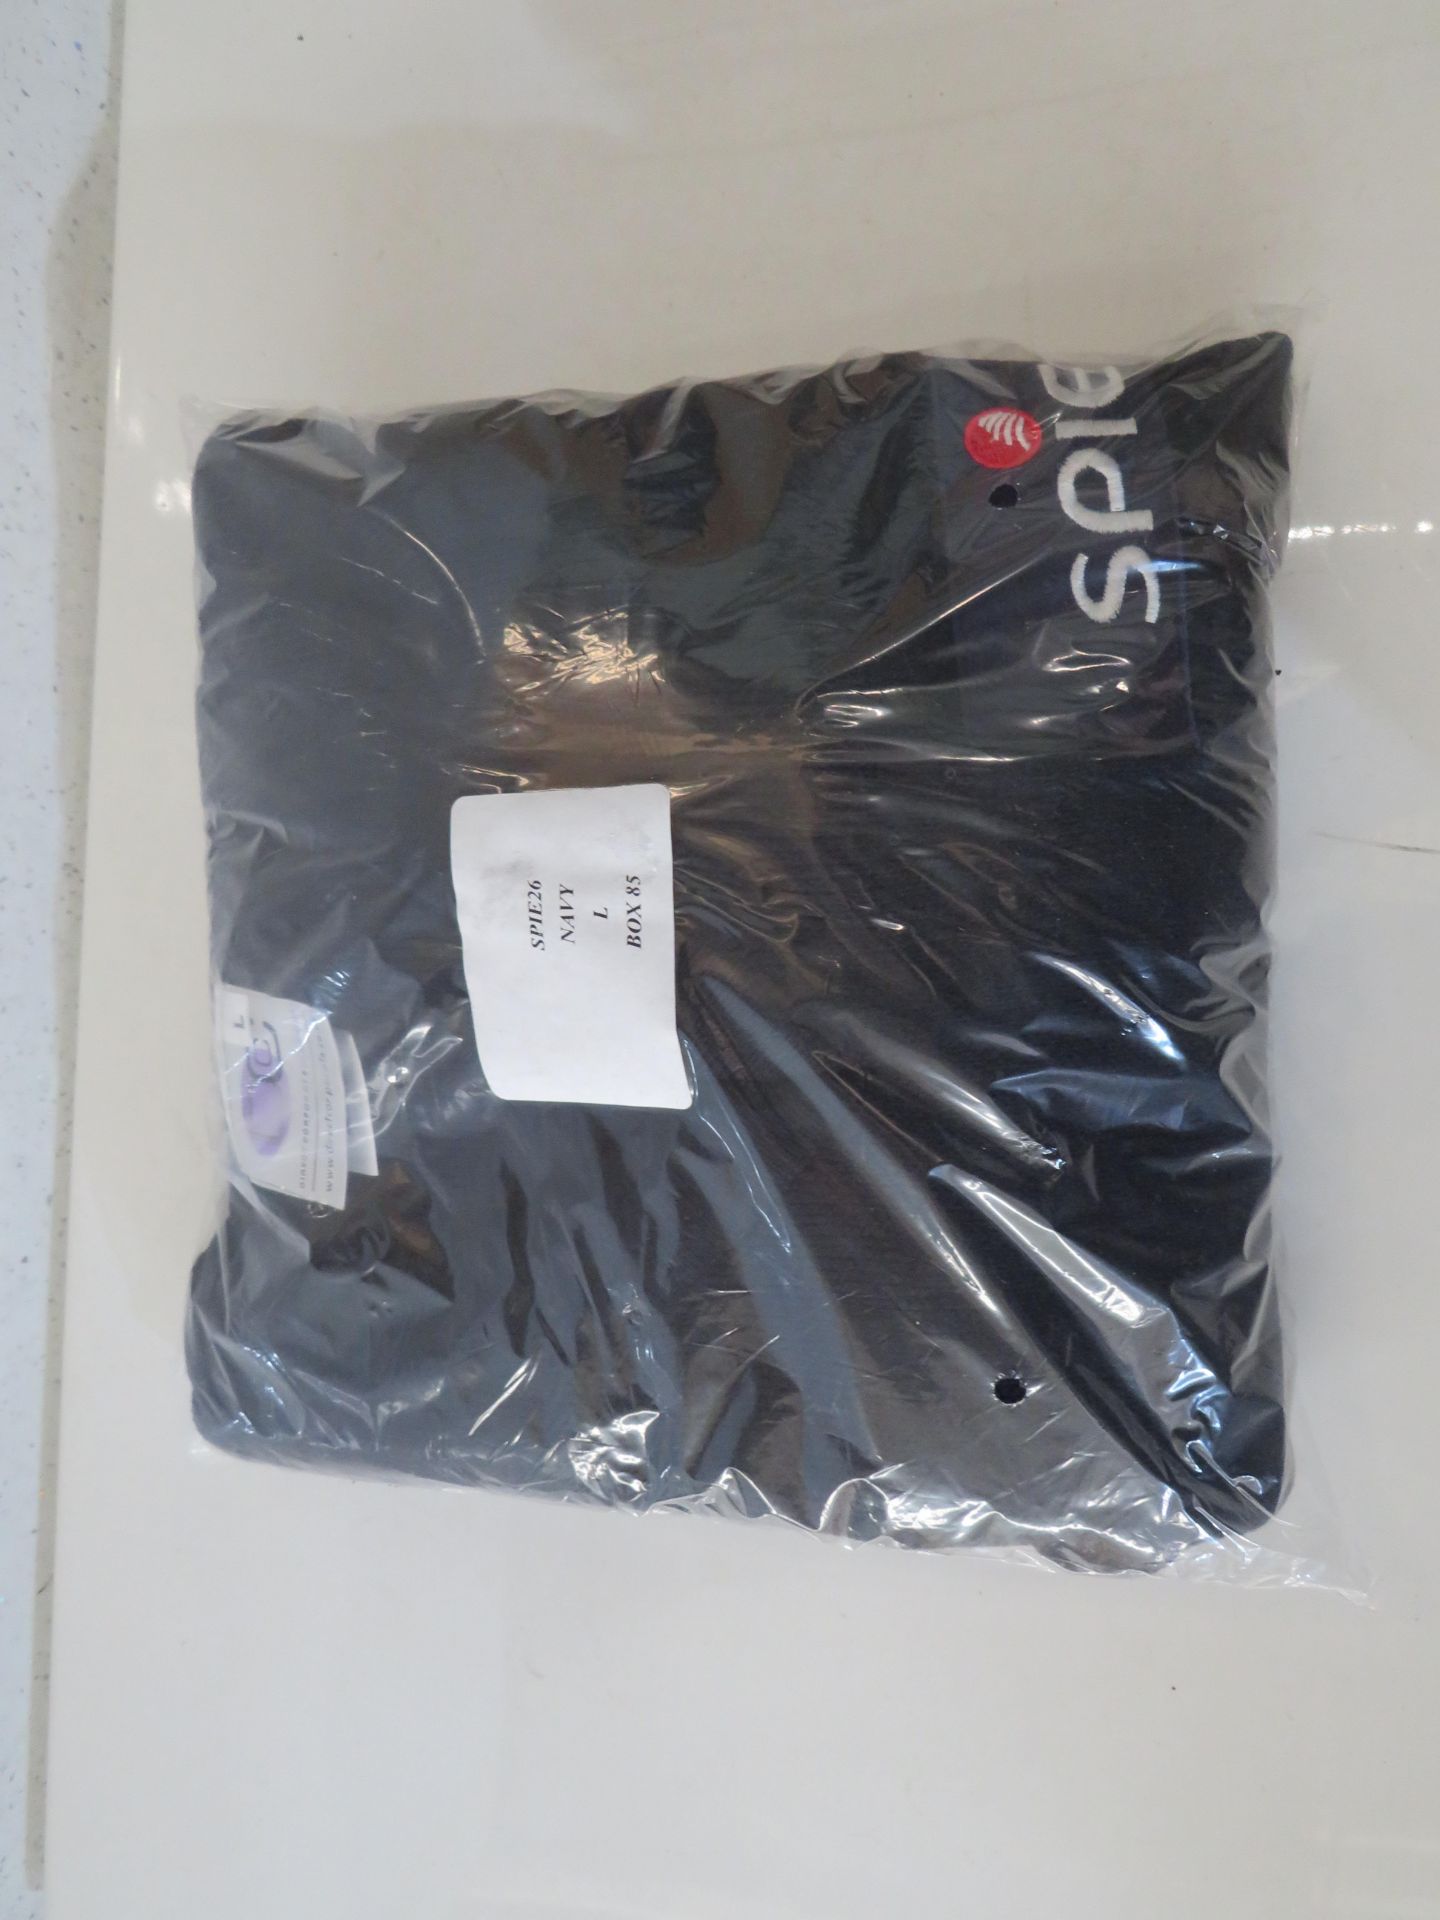 6x SPIE Branded - Navy Cotton Long-Sleeve Jumper - Size Large - New & Packaged.